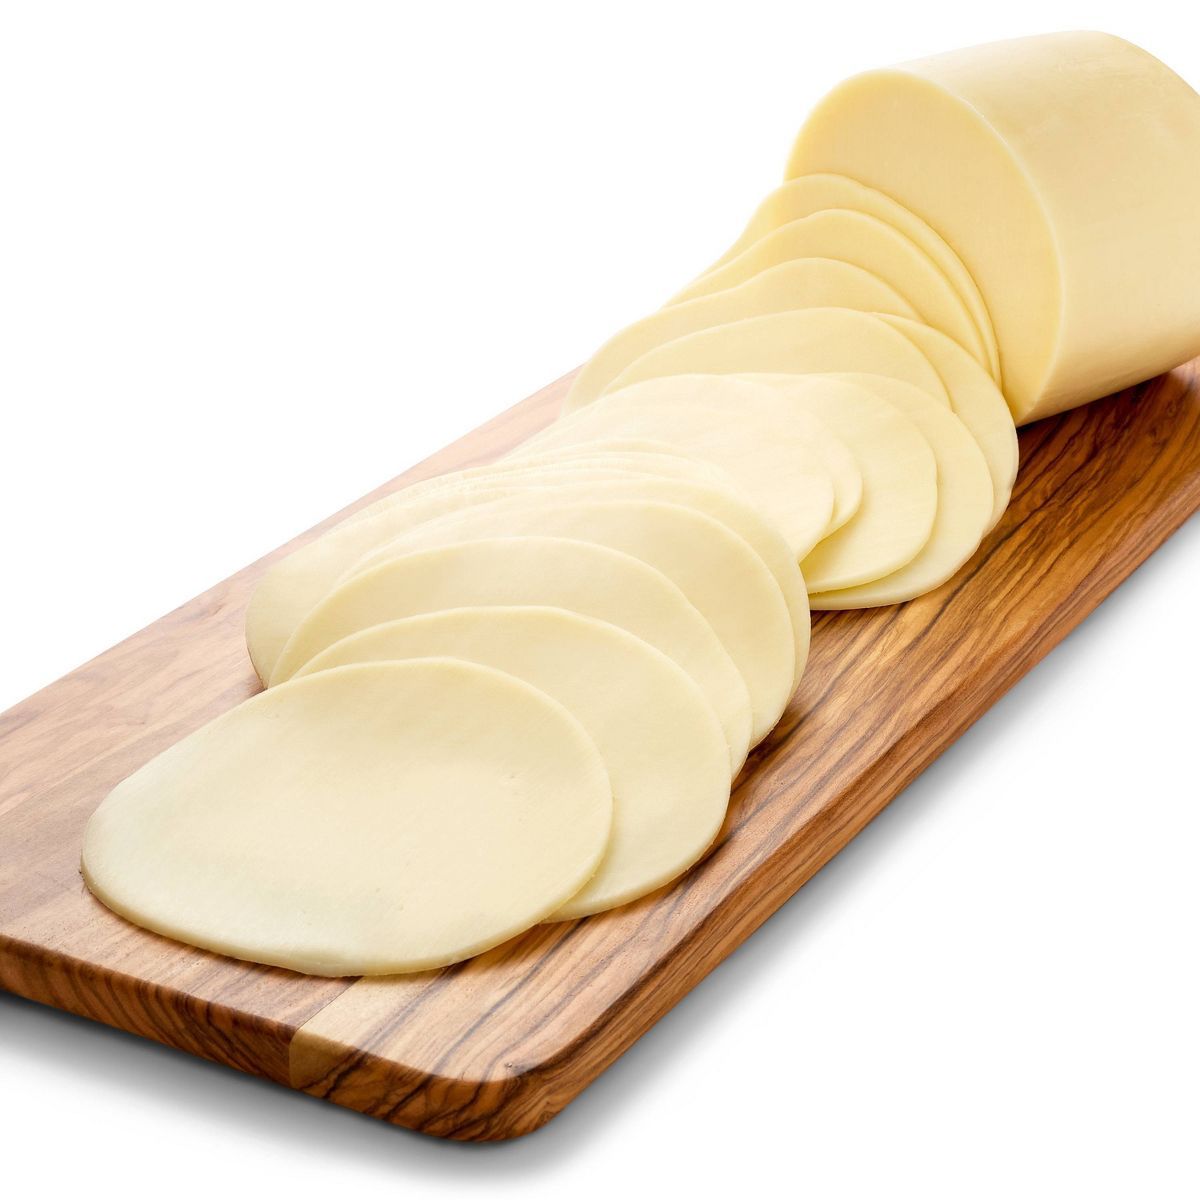 Provolone Cheese - price per lb - Good & Gather™ | Target